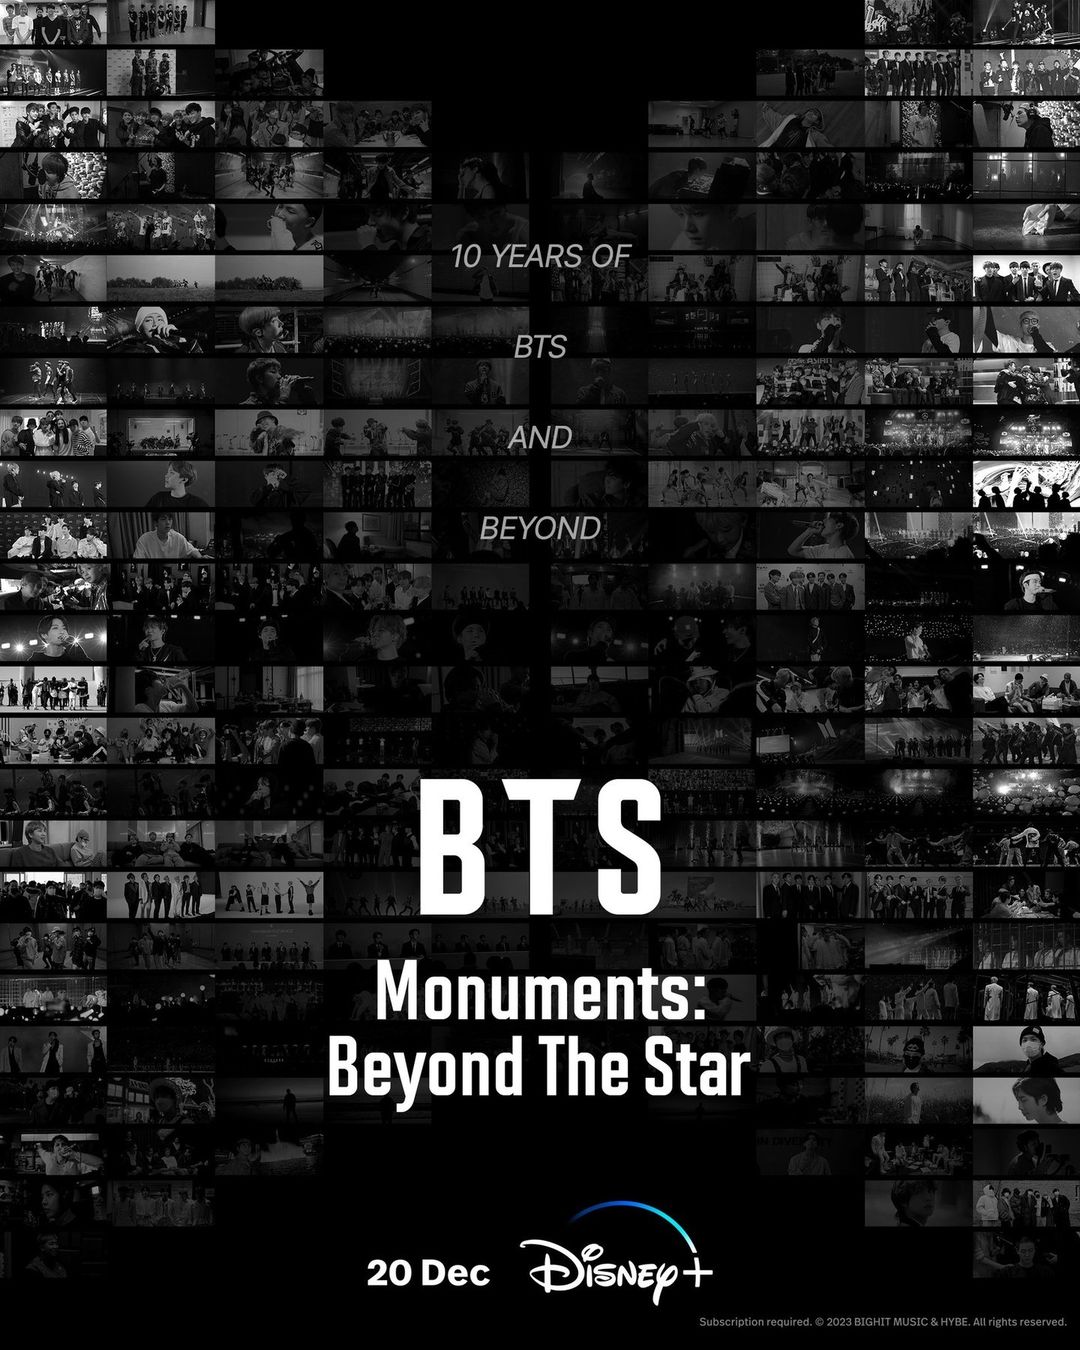 BTS Monuments: Beyond The Star (December 20) -  Disney+HotstarJoin the celebration of BTS's 10th anniversary, capturing their journey as 21st-century pop icons. Experience their rise to stardom and beyond in this exclusive documentary streaming on Disney+Hotstar from December 20.